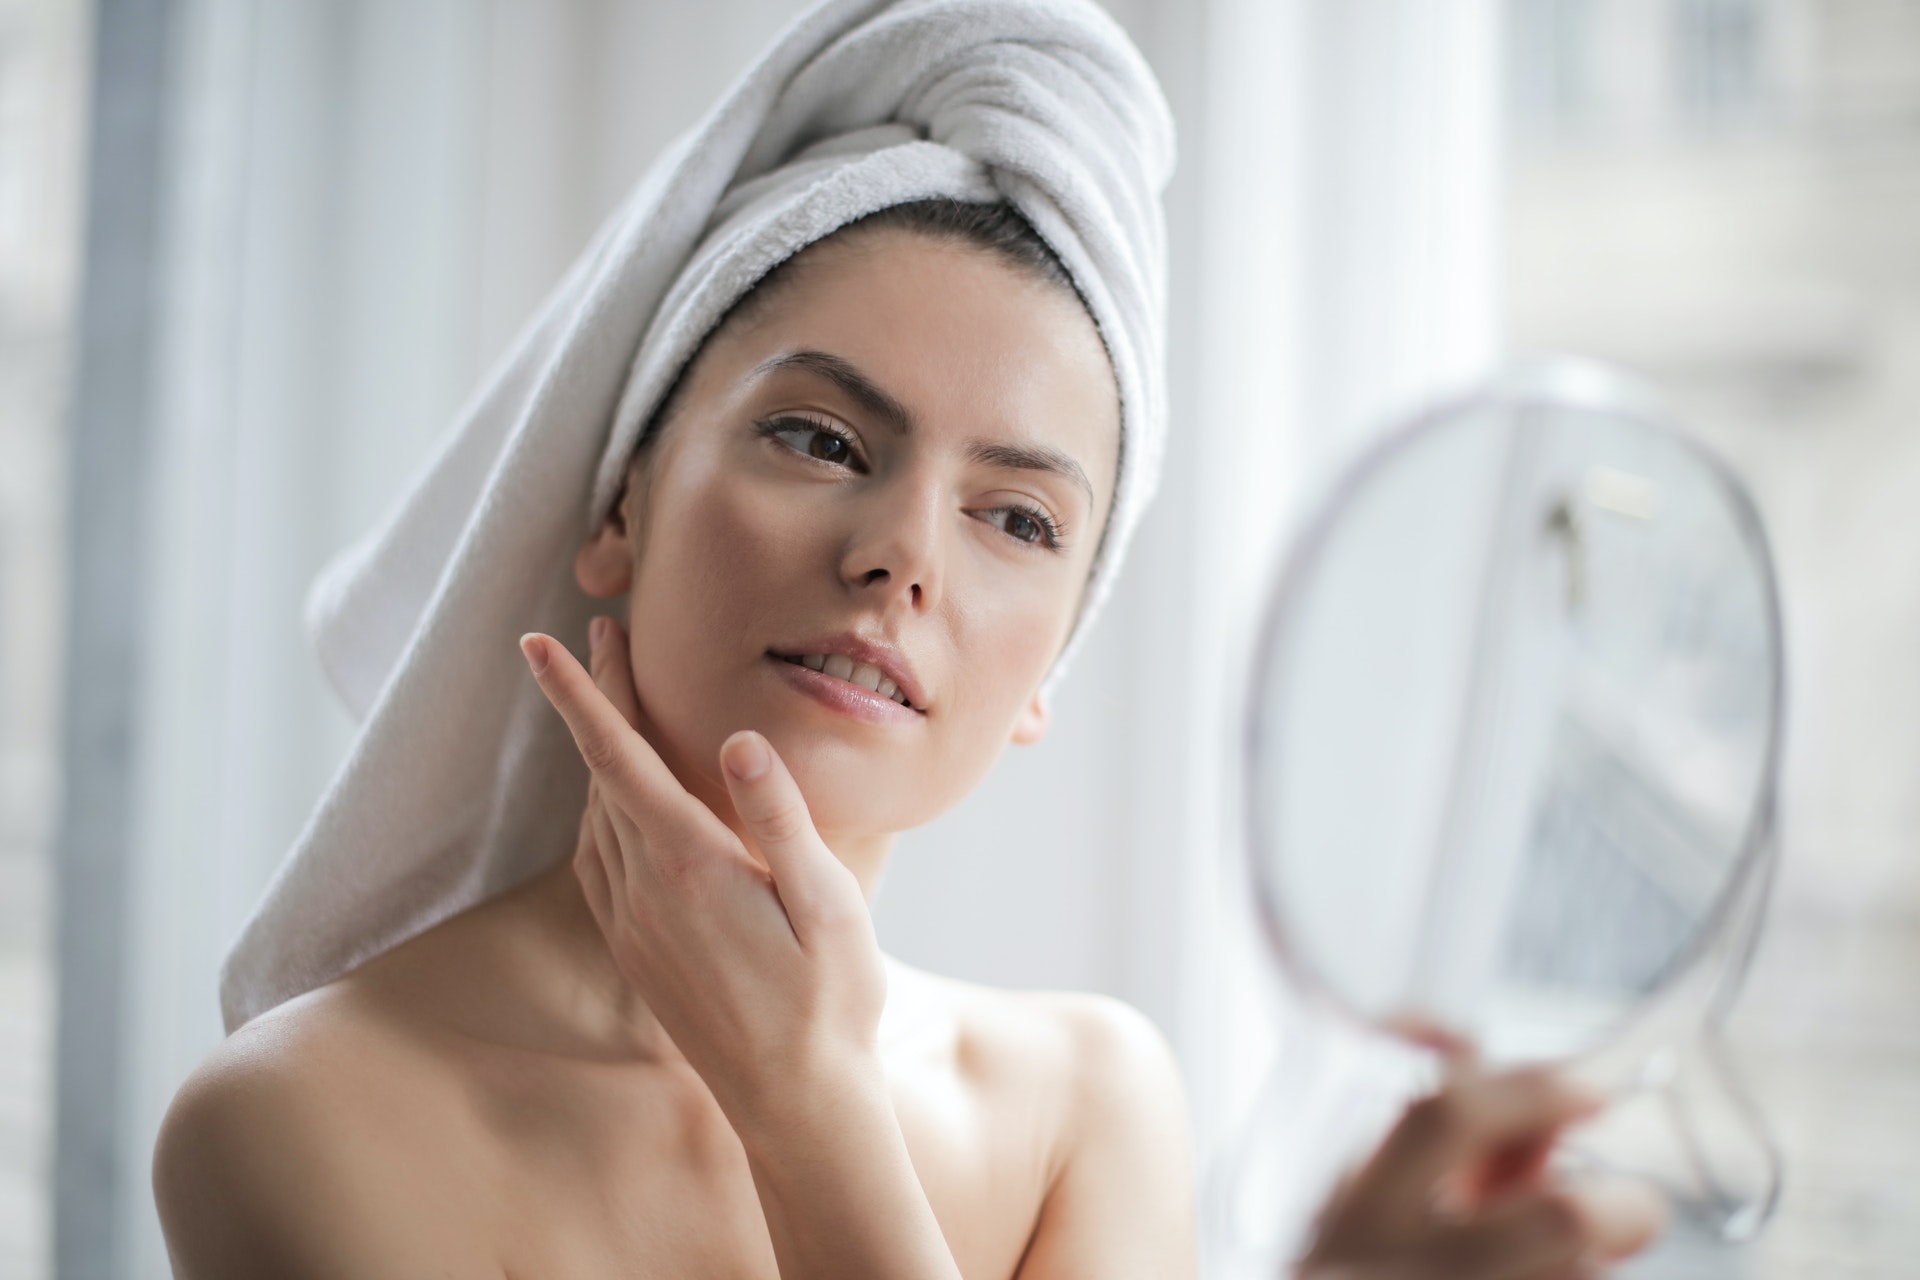 woman wearing towel in hair and touching face while looking at herself in a mirror